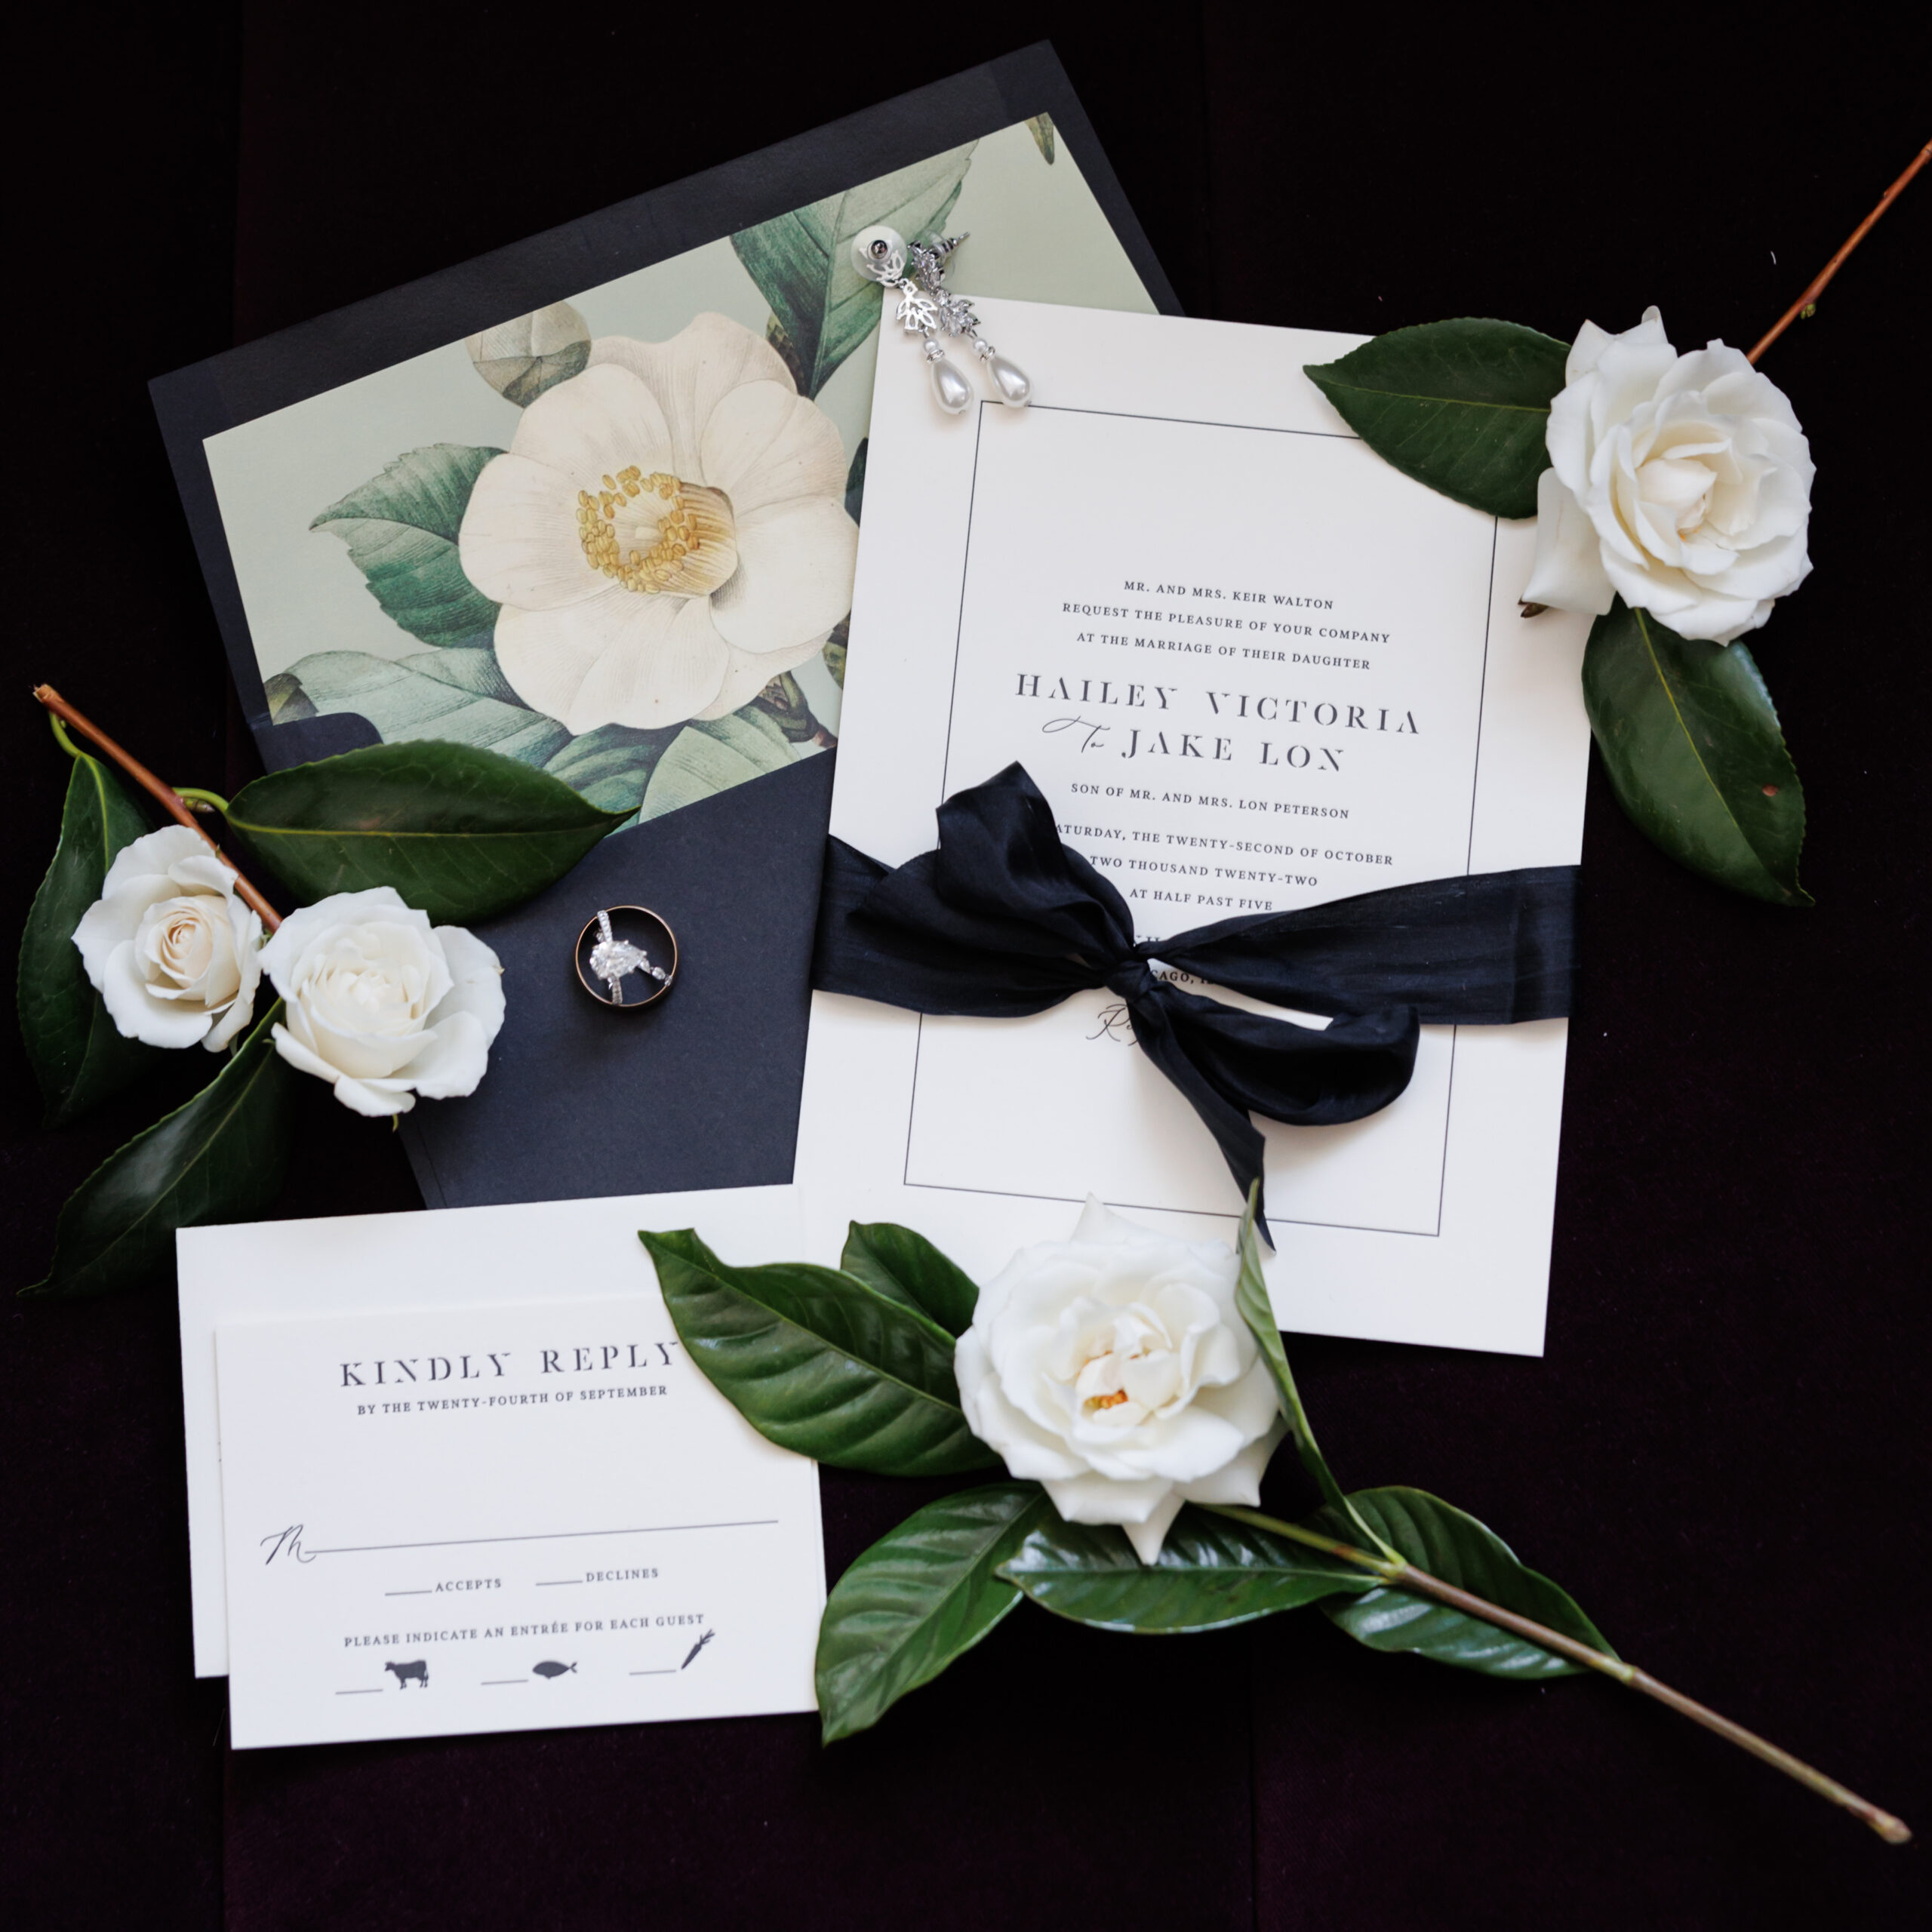 Wedding invitation cards are included in planning your wedding in Chicago